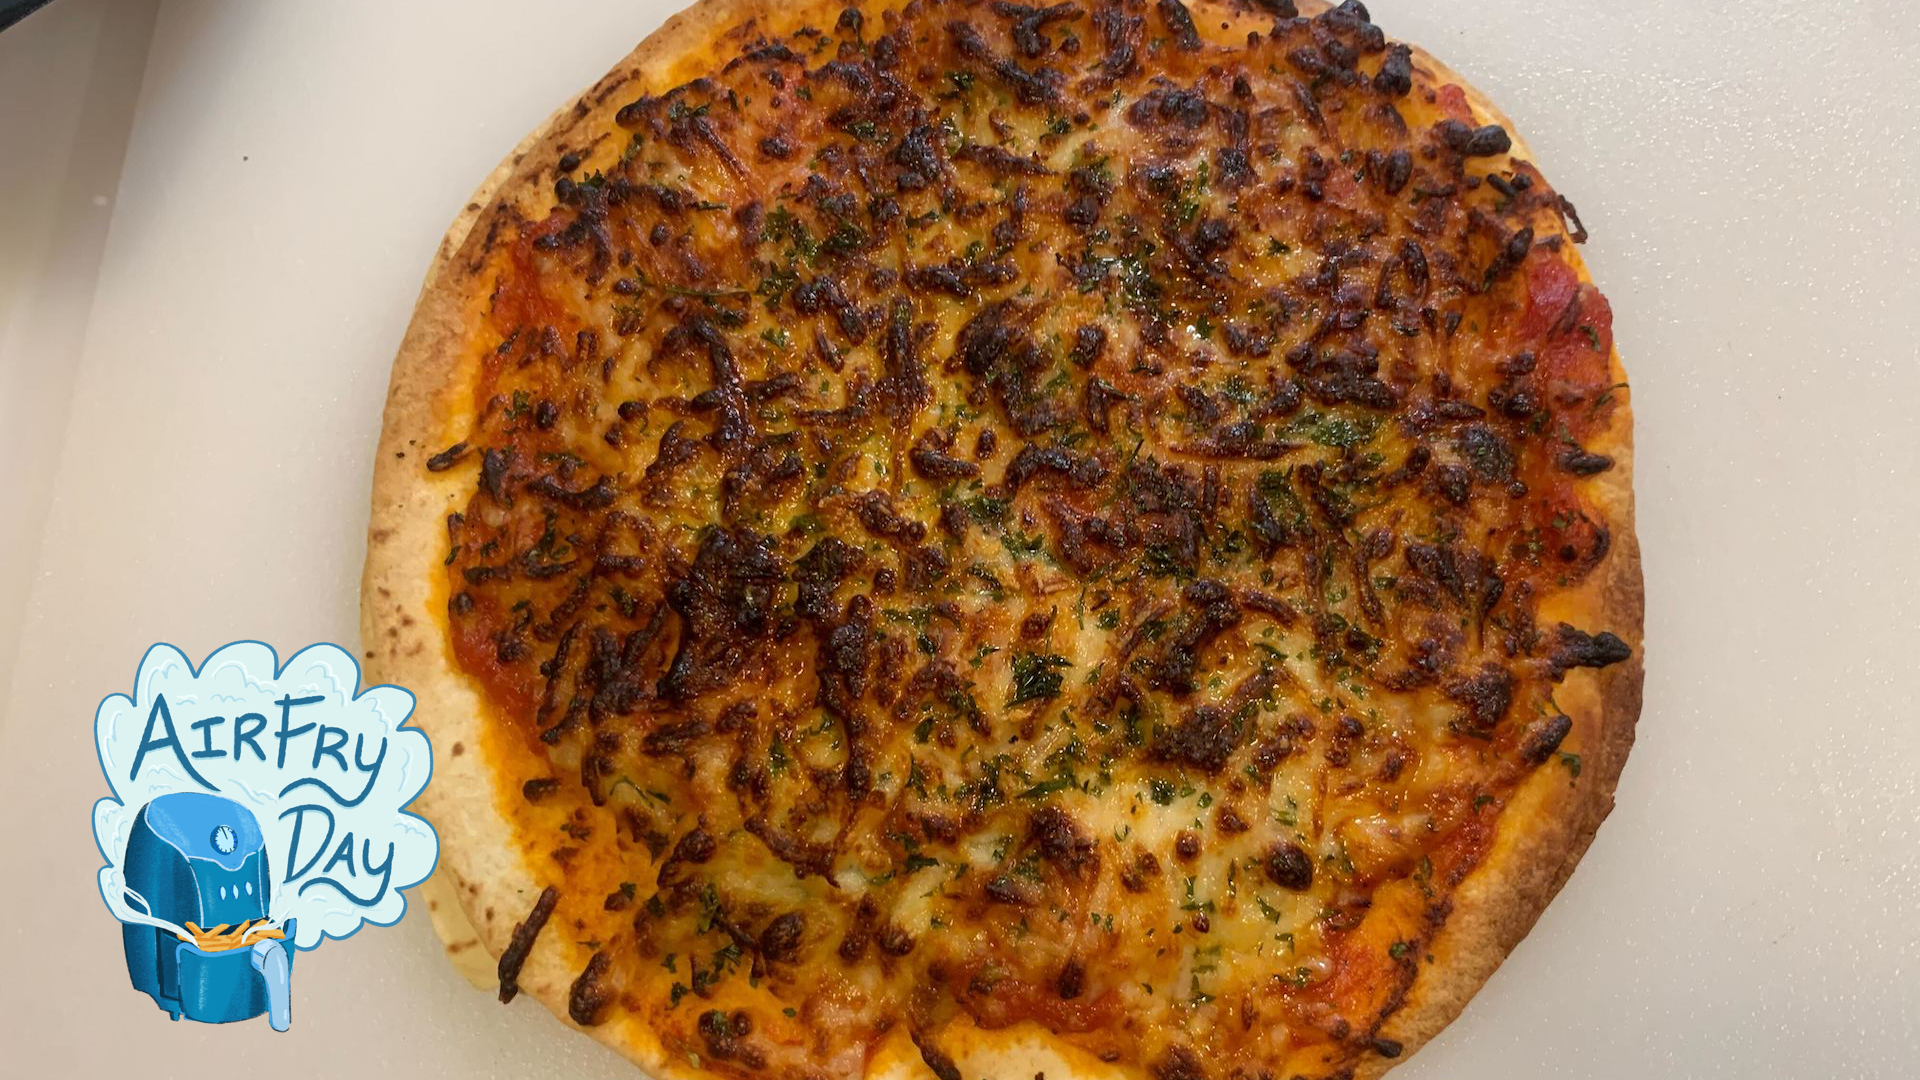 tortilla pizza with airfryday logo